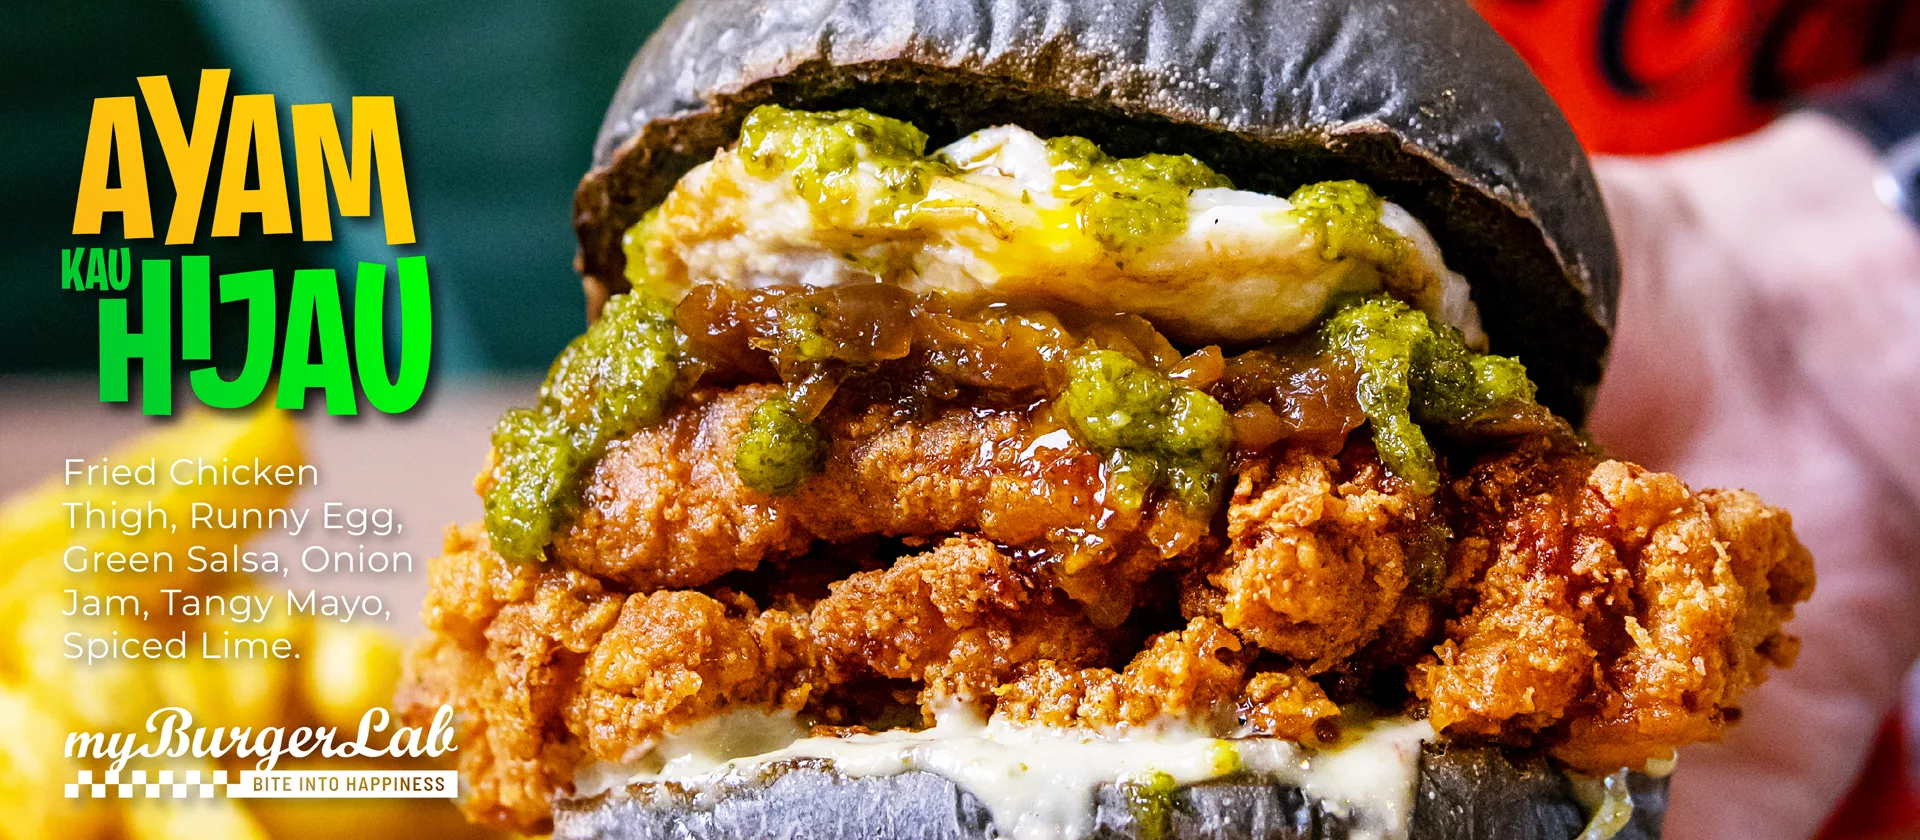 This Glorious Burger Leaves Others Green With Envy.